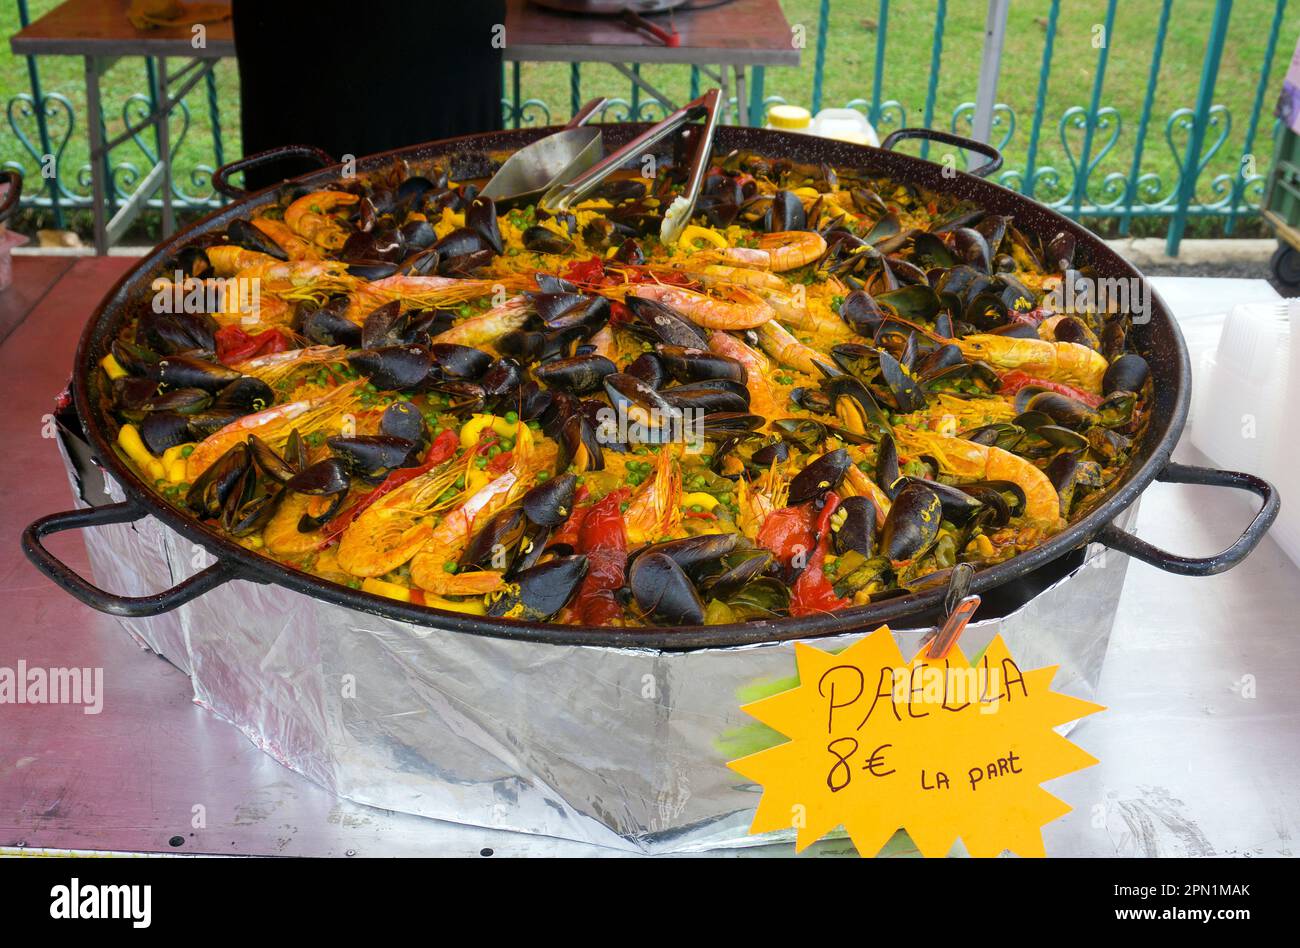 Fresh Paella at a market stall, weekly market in Port Vendres, Pyrénées-Orientales, Languedoc-Roussillon, South France, France, Europe Stock Photo